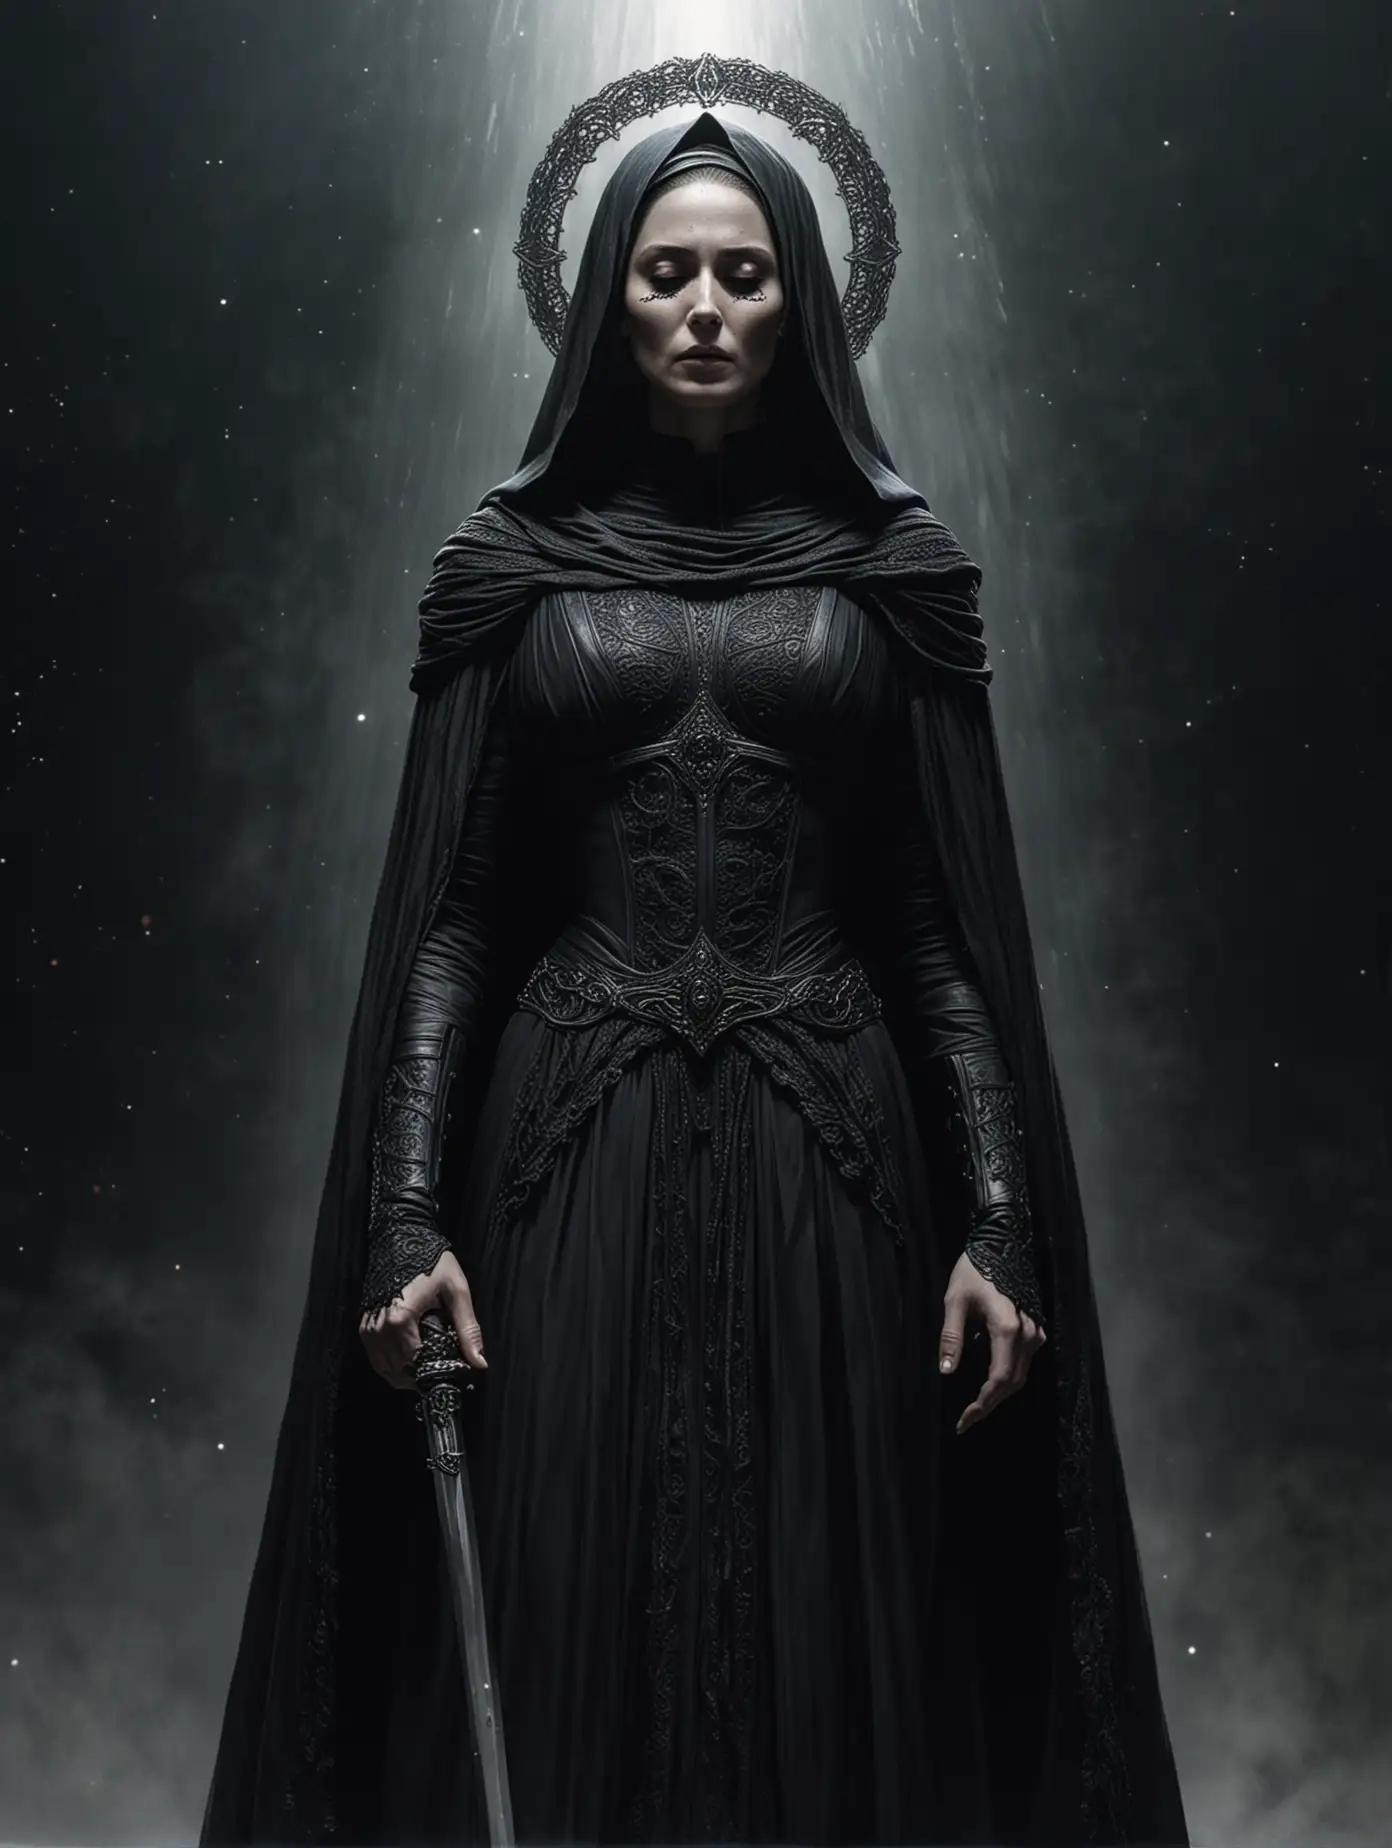 Sister-of-Gesserit-in-Space-with-Glowing-Halo-Crown-and-Black-Sword